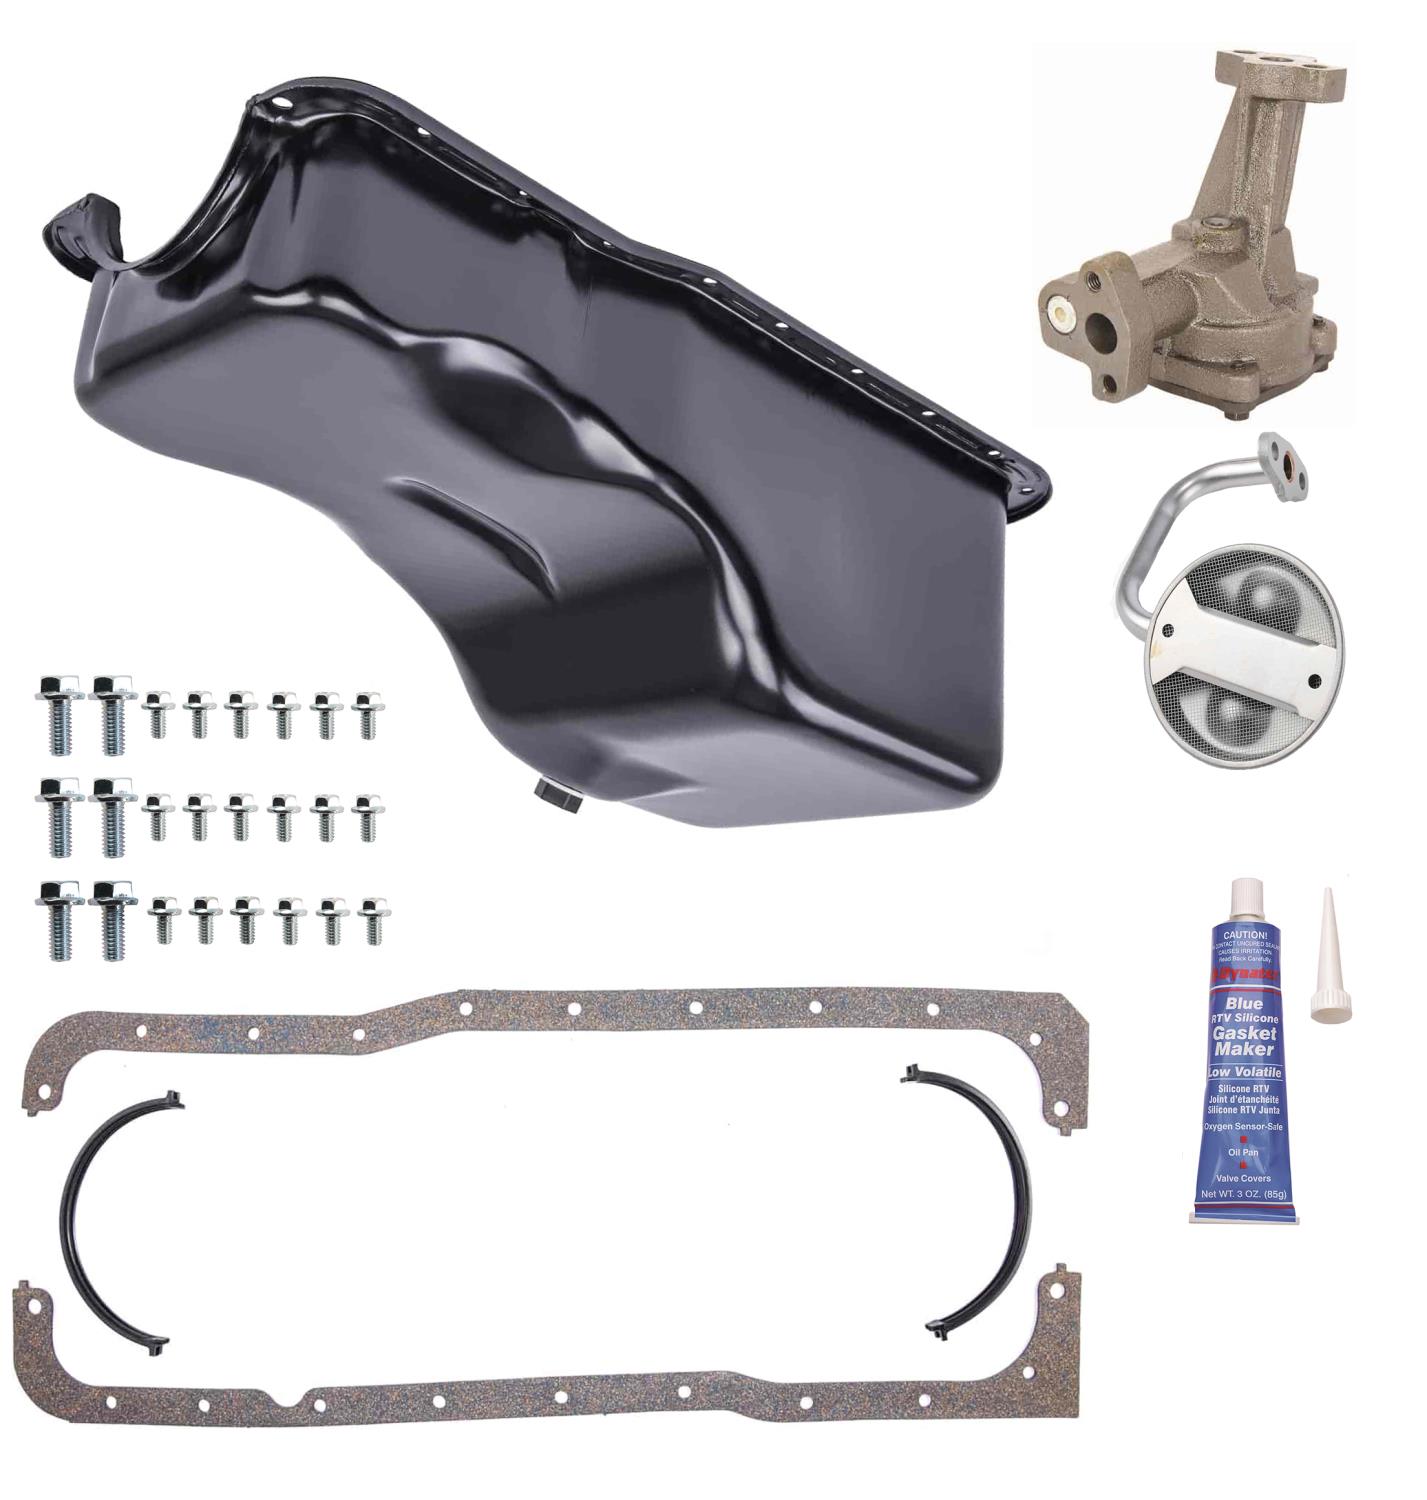 Stock-Style Replacement Oil Pan Kit, with Oil Pump for 1965-1987 Small Block Ford 289-302 [Black]